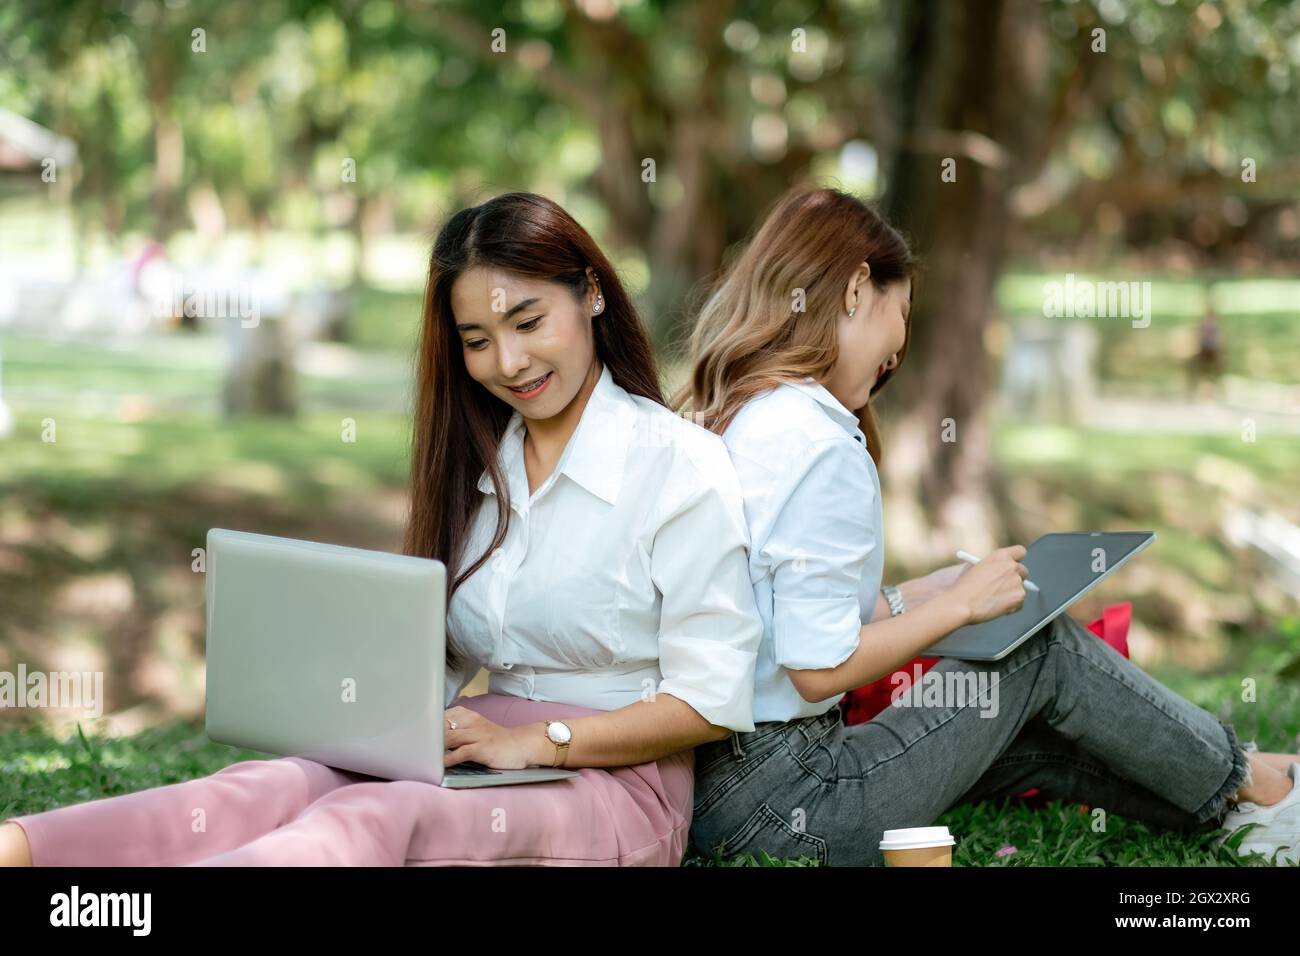 Woman students studying in a group project in the park of university or school. Happy learning, community teamwork and youth friendship concept Stock Photo